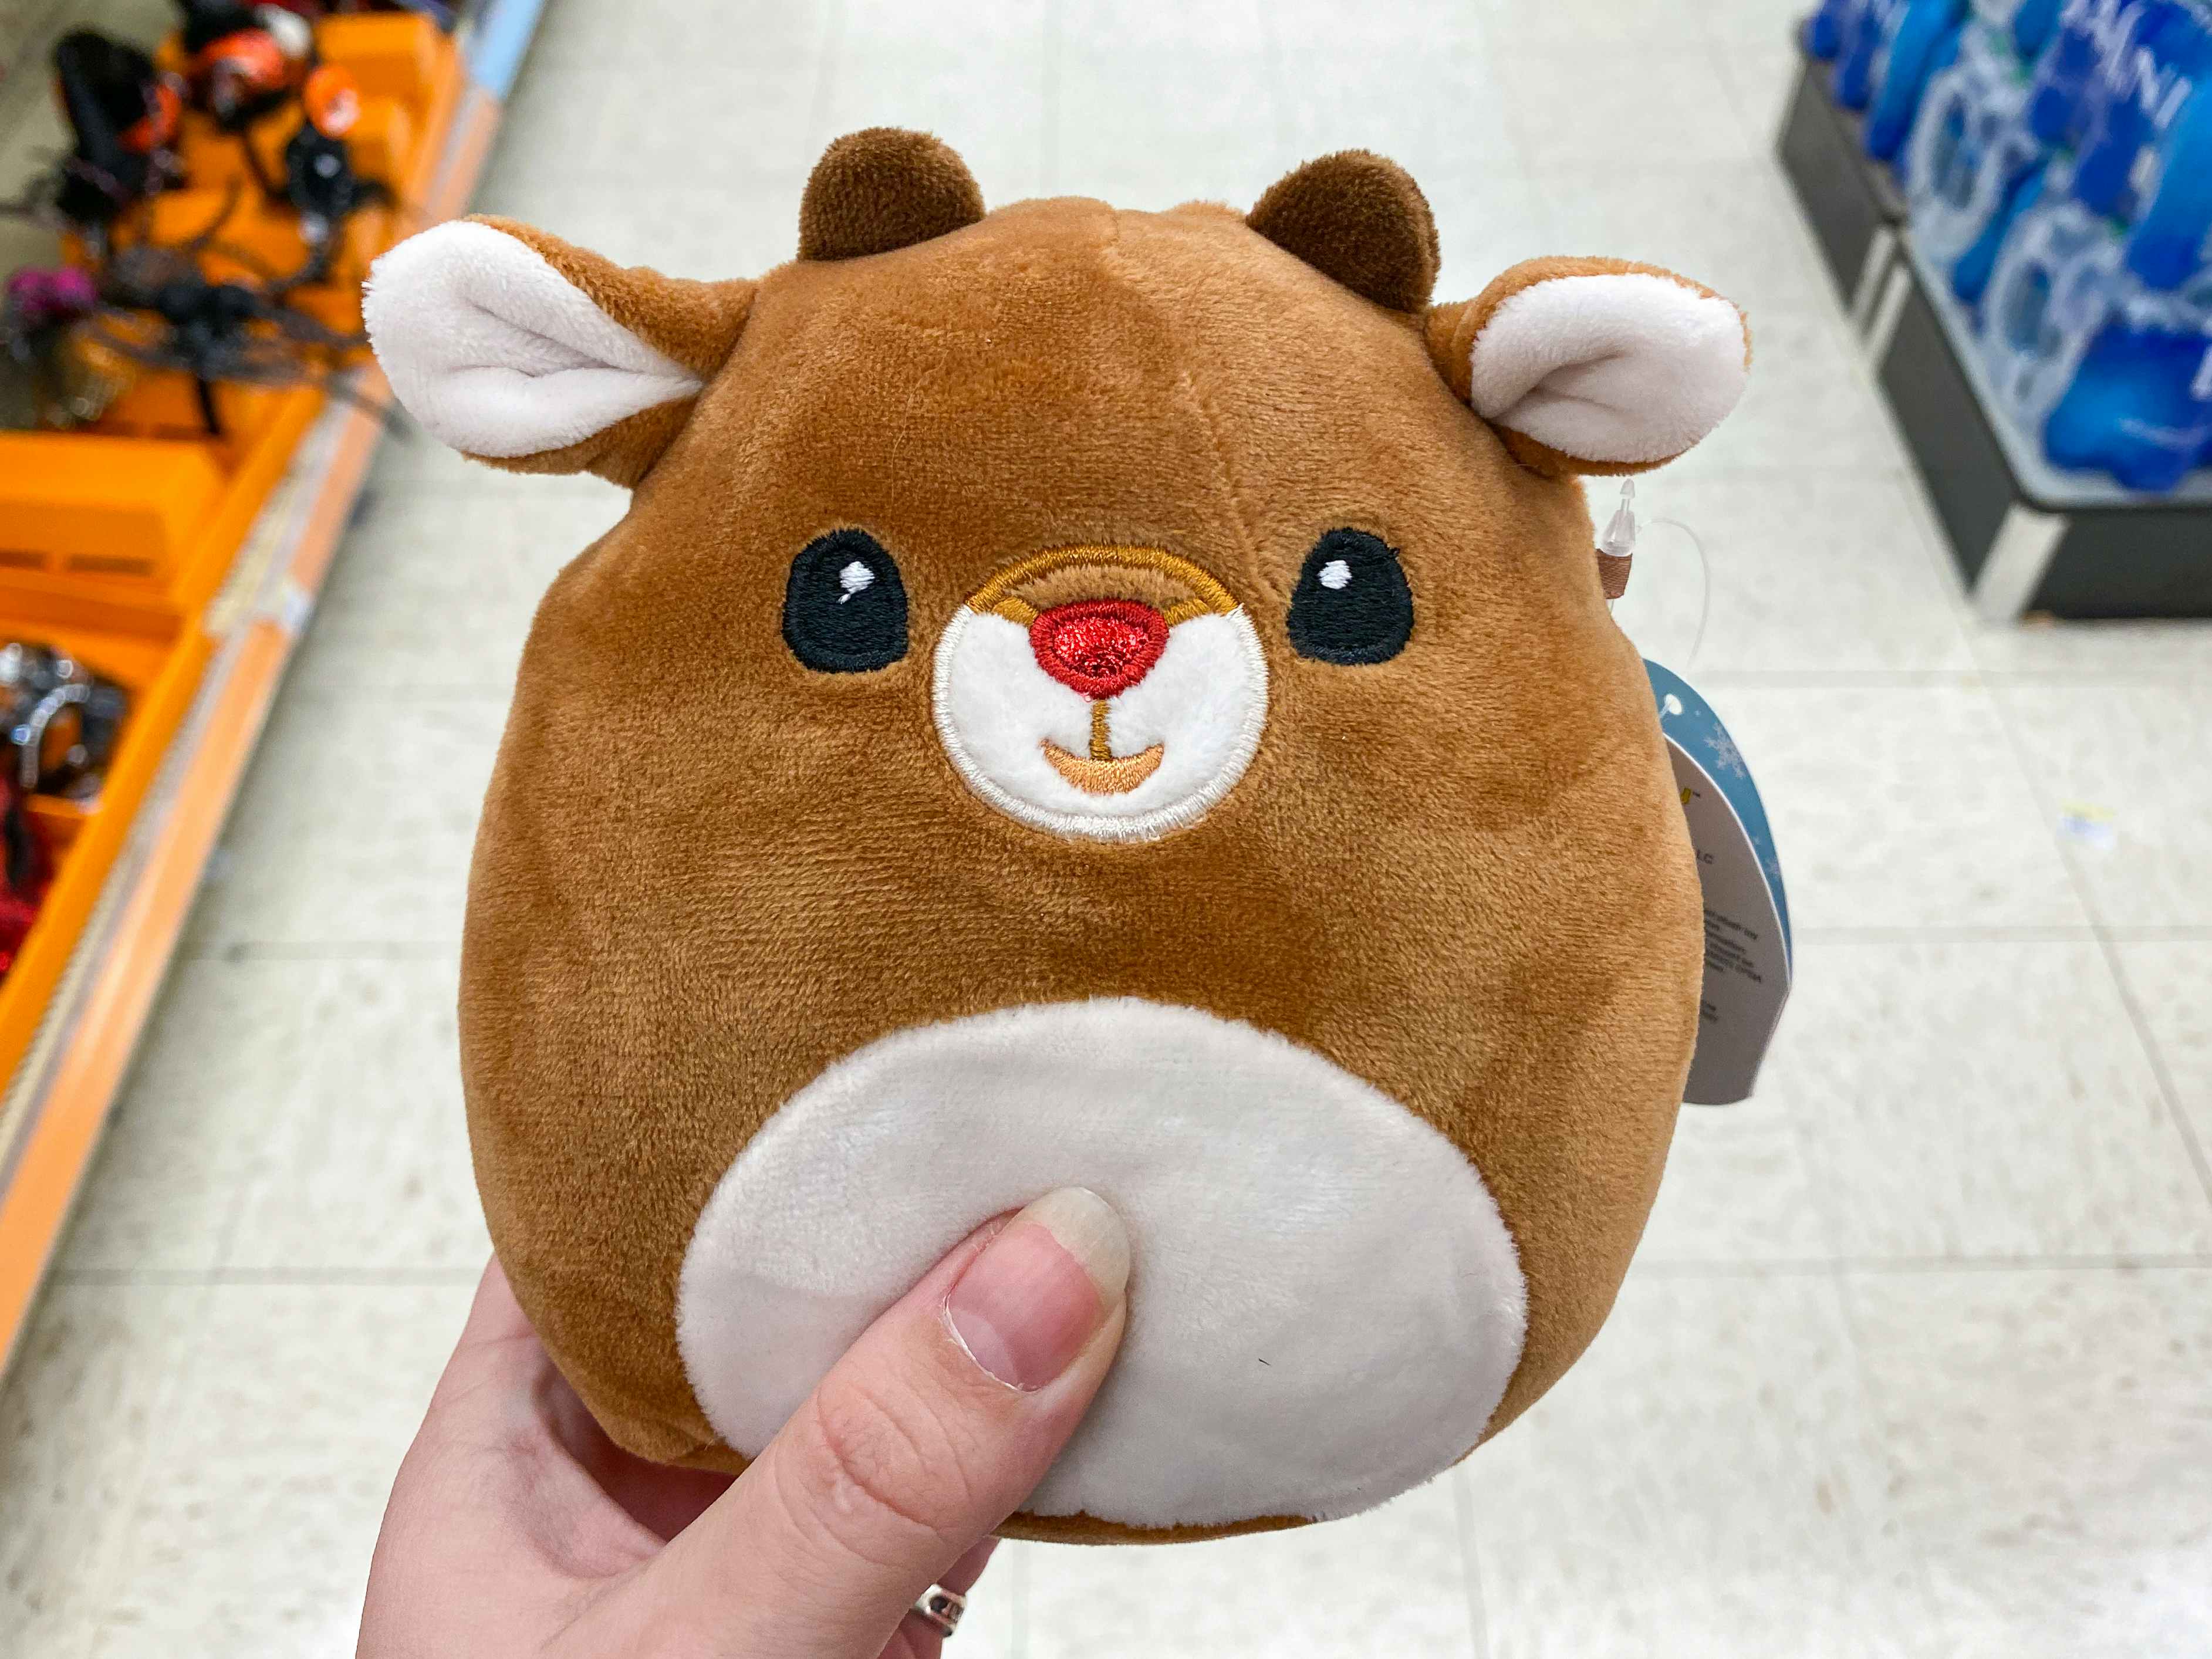 https://prod-cdn-thekrazycouponlady.imgix.net/wp-content/uploads/2022/10/best-holiday-squishmallows-where-to-find-christmas-rudolph-reindeer-walgreens-1665153969-1665153969.jpg?auto=format&fit=fill&q=25